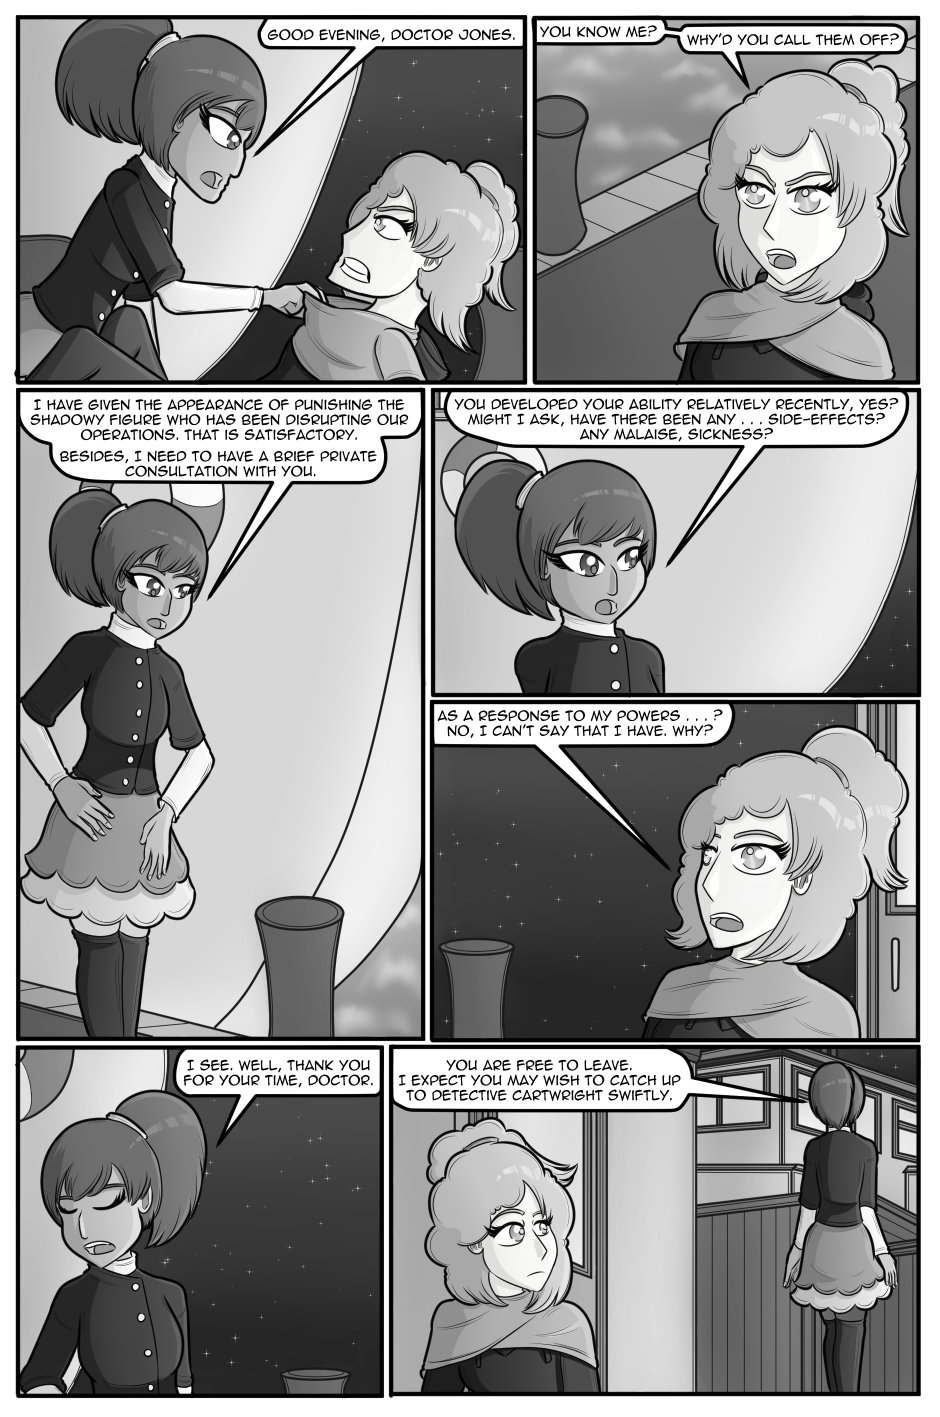 Shadows and Spectres - Part 31